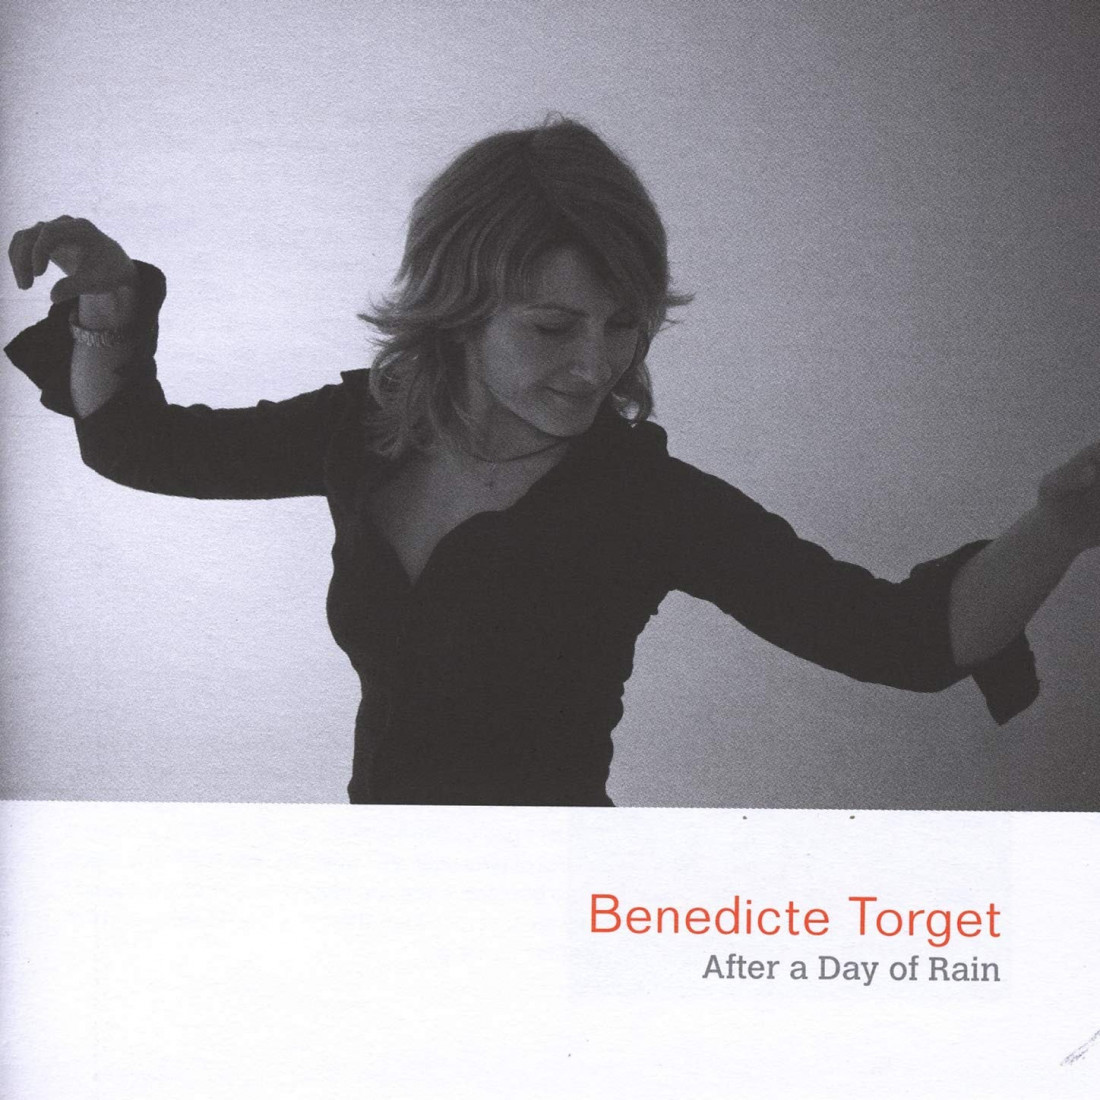 [Benedicte Torget] Sleep Awhile (After a Day of Rain) Photo-Image